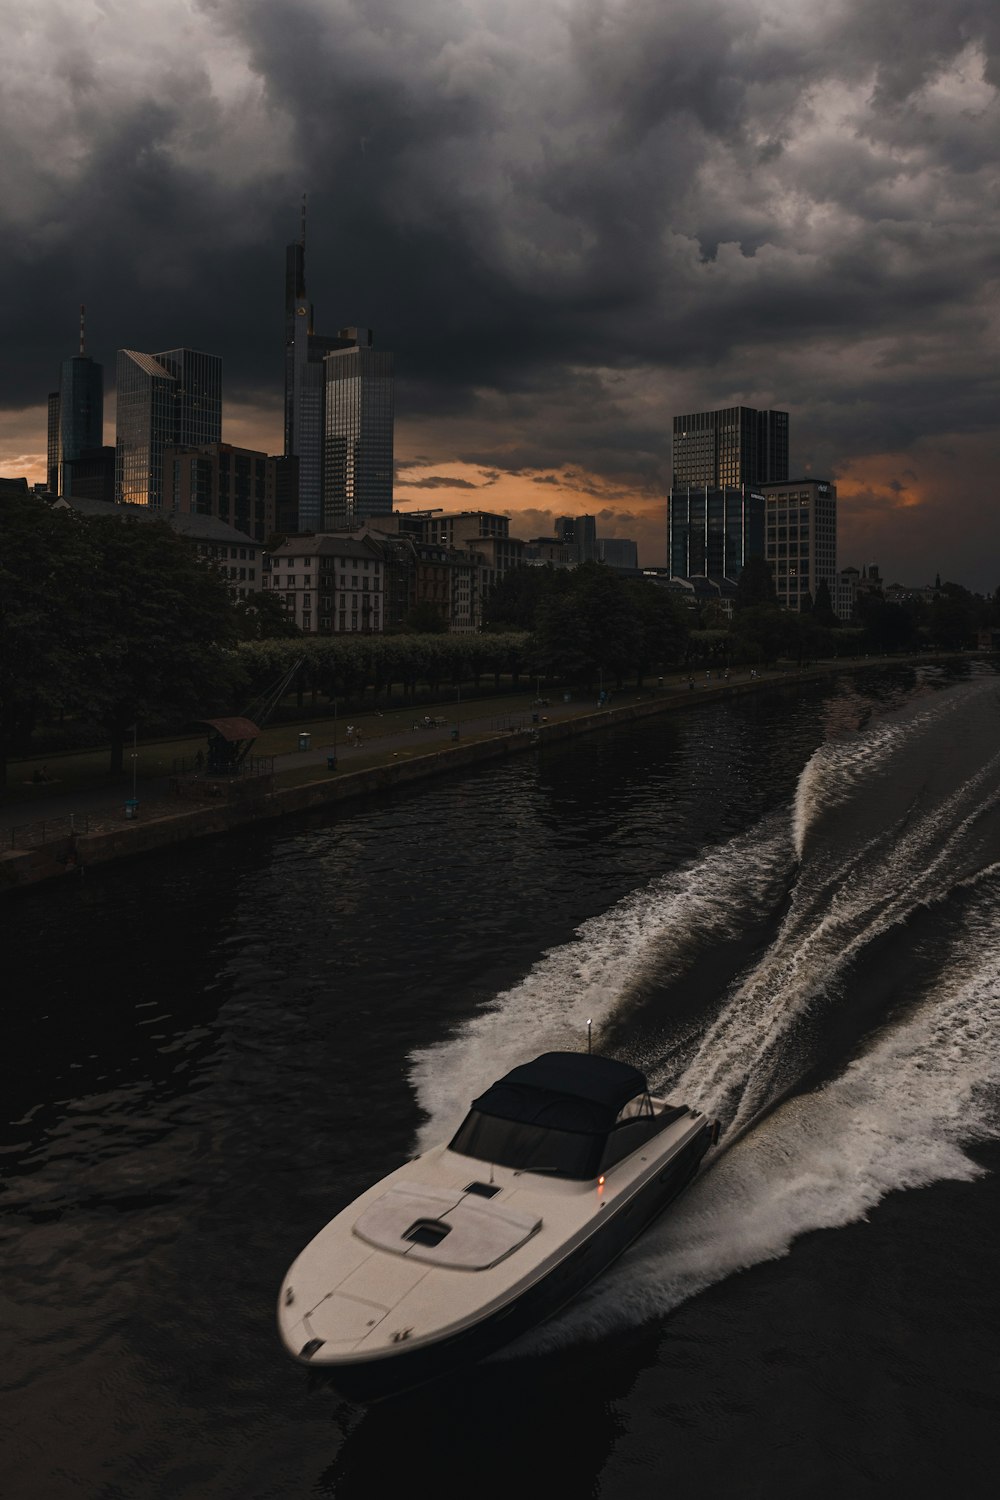 a speed boat speeds through the water in front of a city skyline